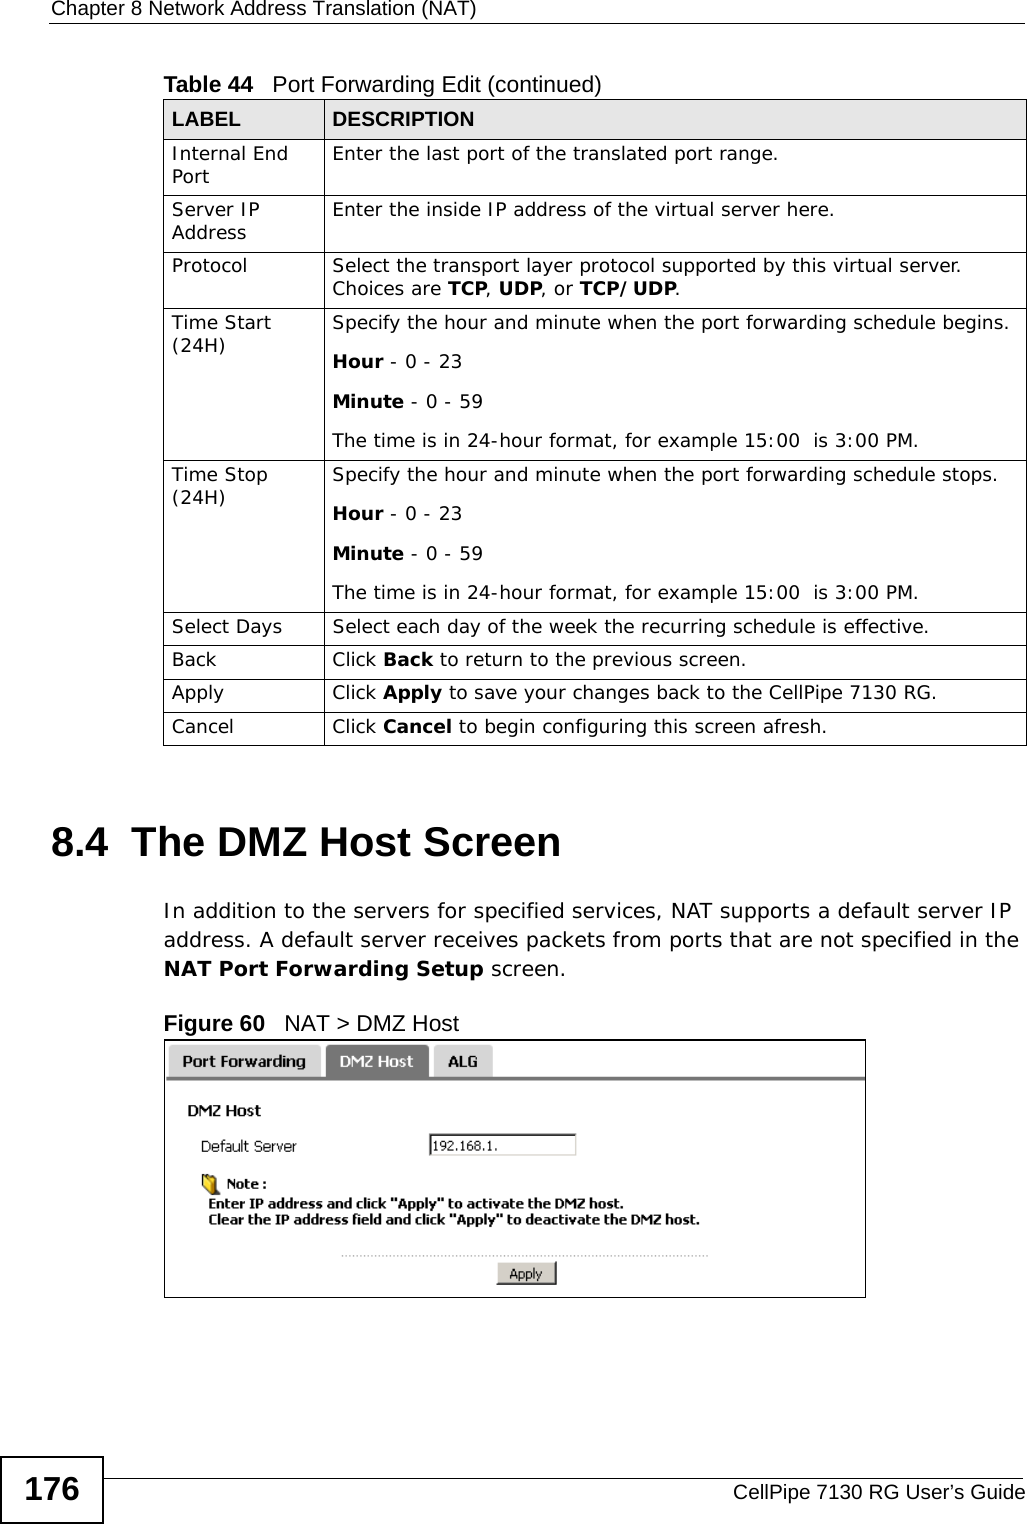 Chapter 8 Network Address Translation (NAT)CellPipe 7130 RG User’s Guide1768.4  The DMZ Host ScreenIn addition to the servers for specified services, NAT supports a default server IP address. A default server receives packets from ports that are not specified in the NAT Port Forwarding Setup screen.Figure 60   NAT &gt; DMZ Host Internal End Port  Enter the last port of the translated port range.Server IP Address Enter the inside IP address of the virtual server here.Protocol Select the transport layer protocol supported by this virtual server. Choices are TCP, UDP, or TCP/UDP.Time Start (24H) Specify the hour and minute when the port forwarding schedule begins.Hour - 0 - 23Minute - 0 - 59The time is in 24-hour format, for example 15:00  is 3:00 PM.Time Stop (24H) Specify the hour and minute when the port forwarding schedule stops.Hour - 0 - 23Minute - 0 - 59The time is in 24-hour format, for example 15:00  is 3:00 PM.Select Days Select each day of the week the recurring schedule is effective.Back Click Back to return to the previous screen.Apply Click Apply to save your changes back to the CellPipe 7130 RG.Cancel Click Cancel to begin configuring this screen afresh.Table 44   Port Forwarding Edit (continued)LABEL DESCRIPTION